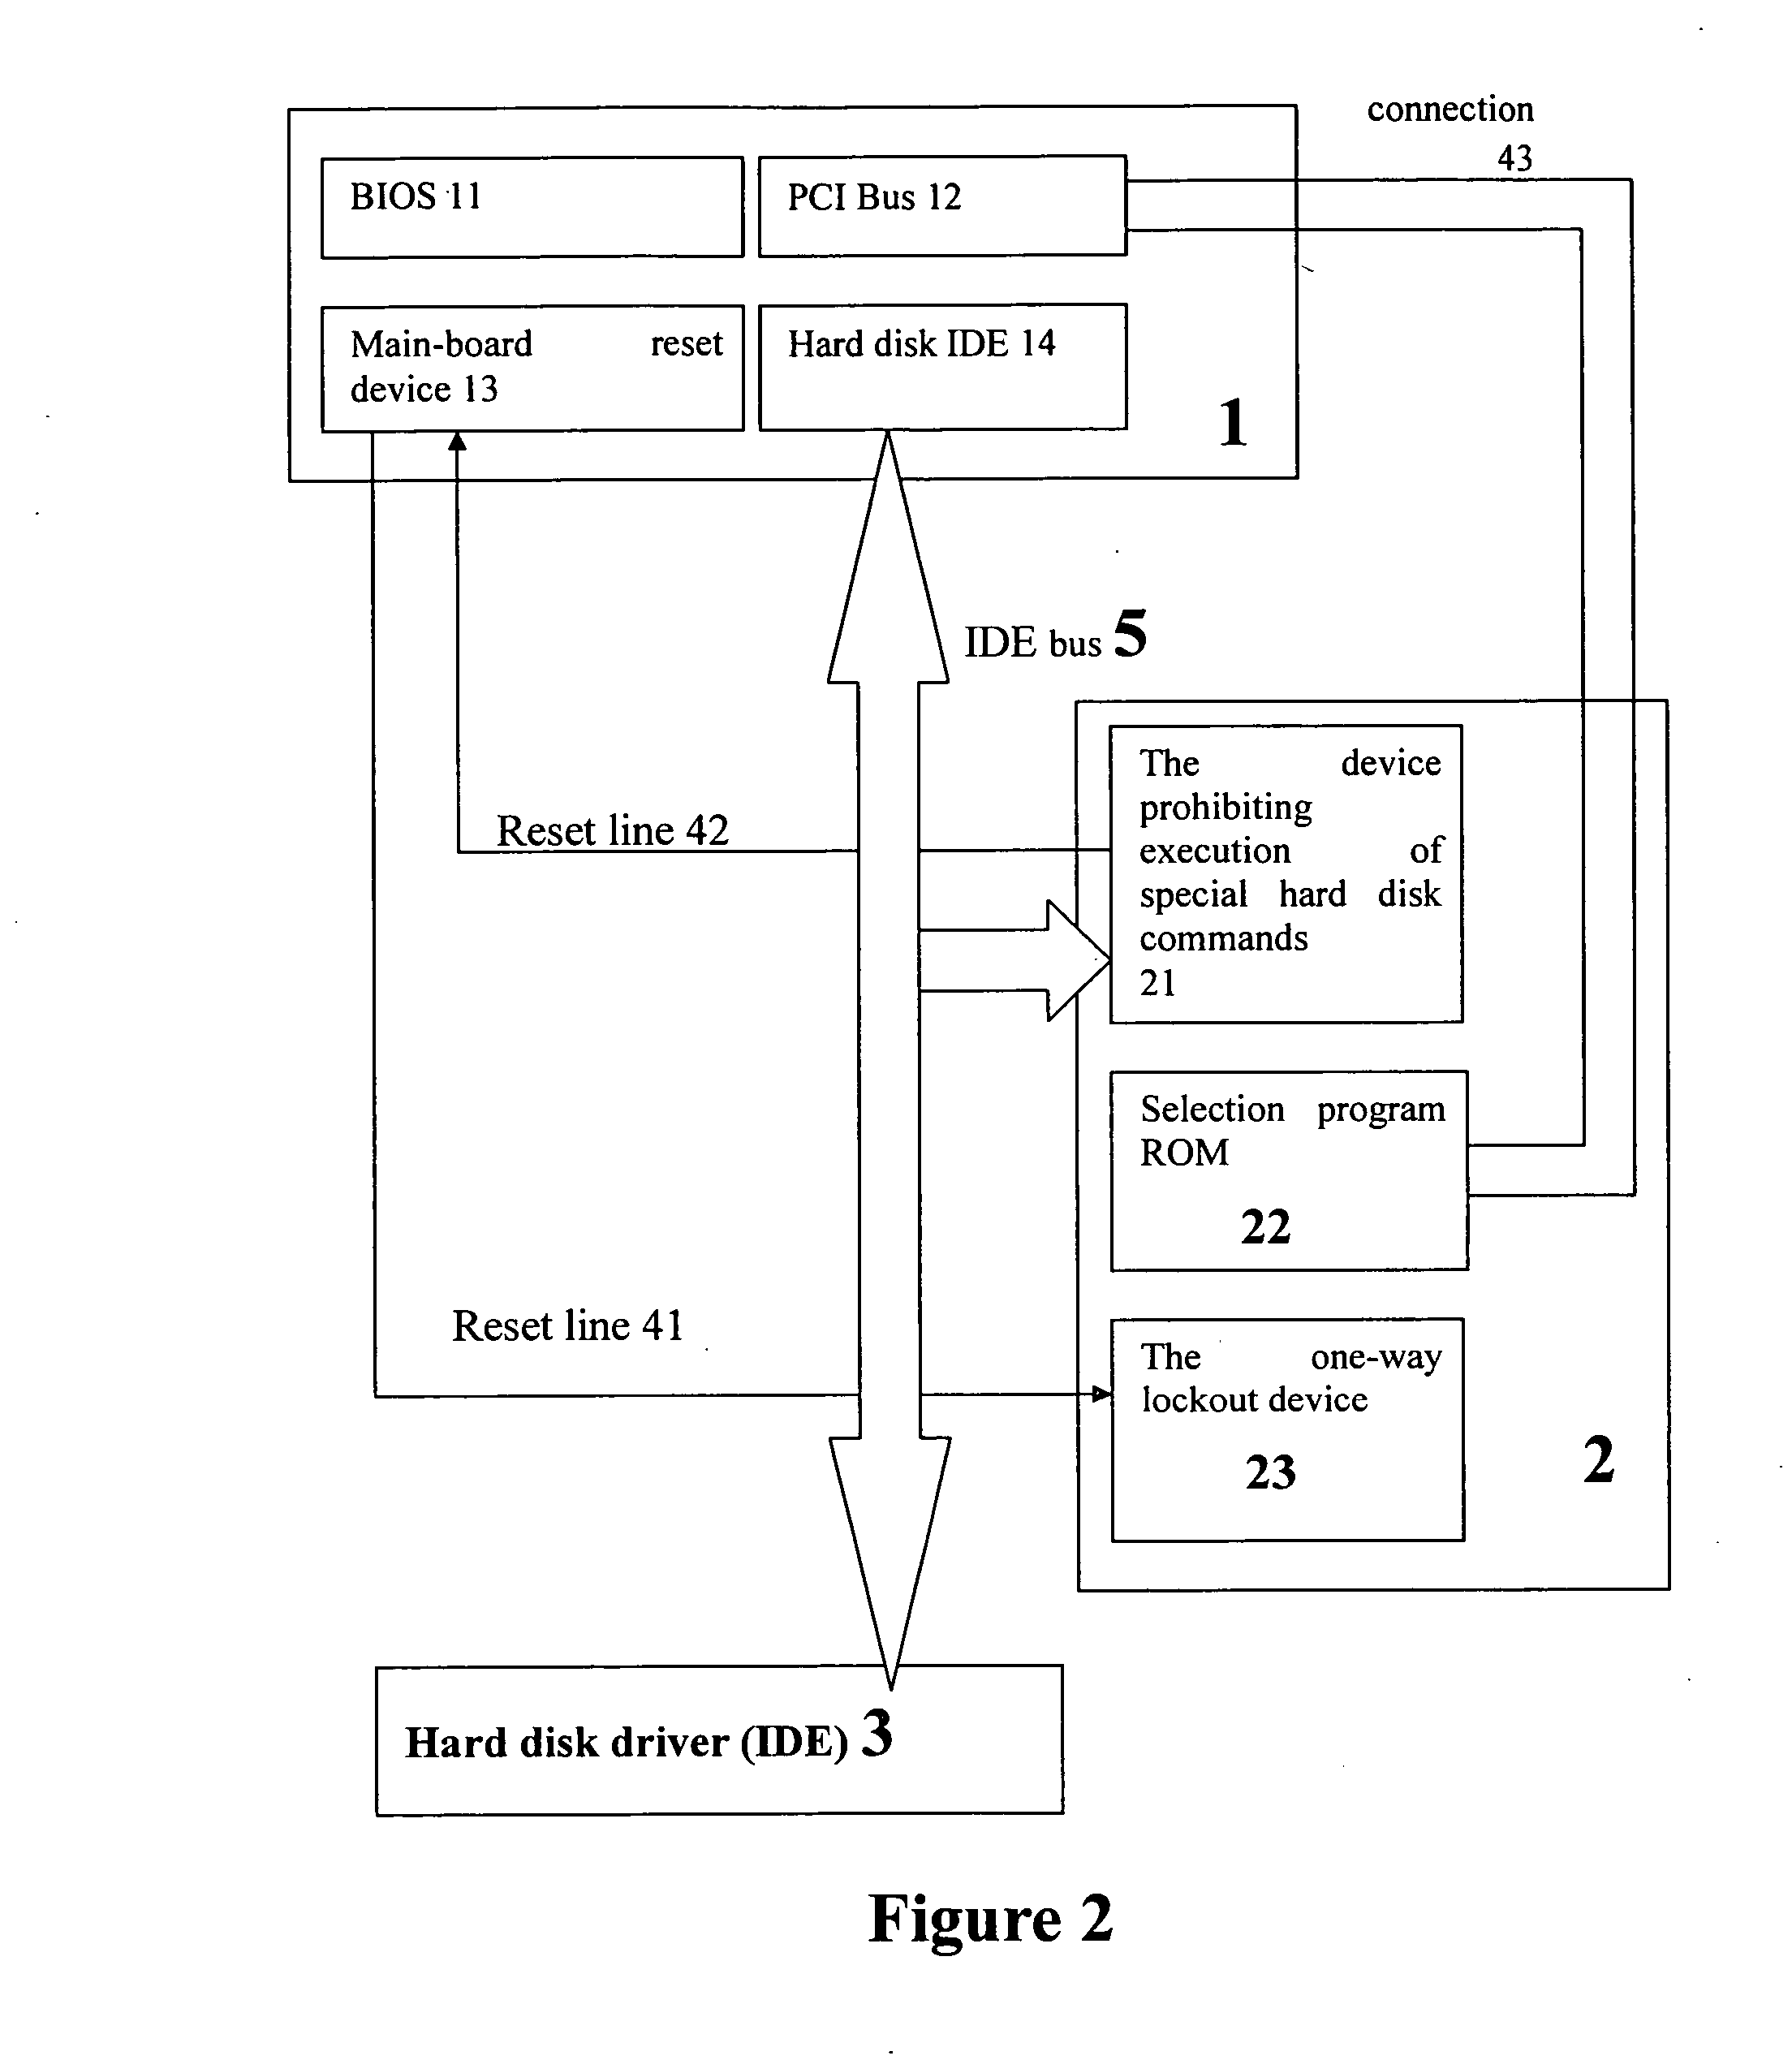 Apparatus and method for securely isolating hard disk